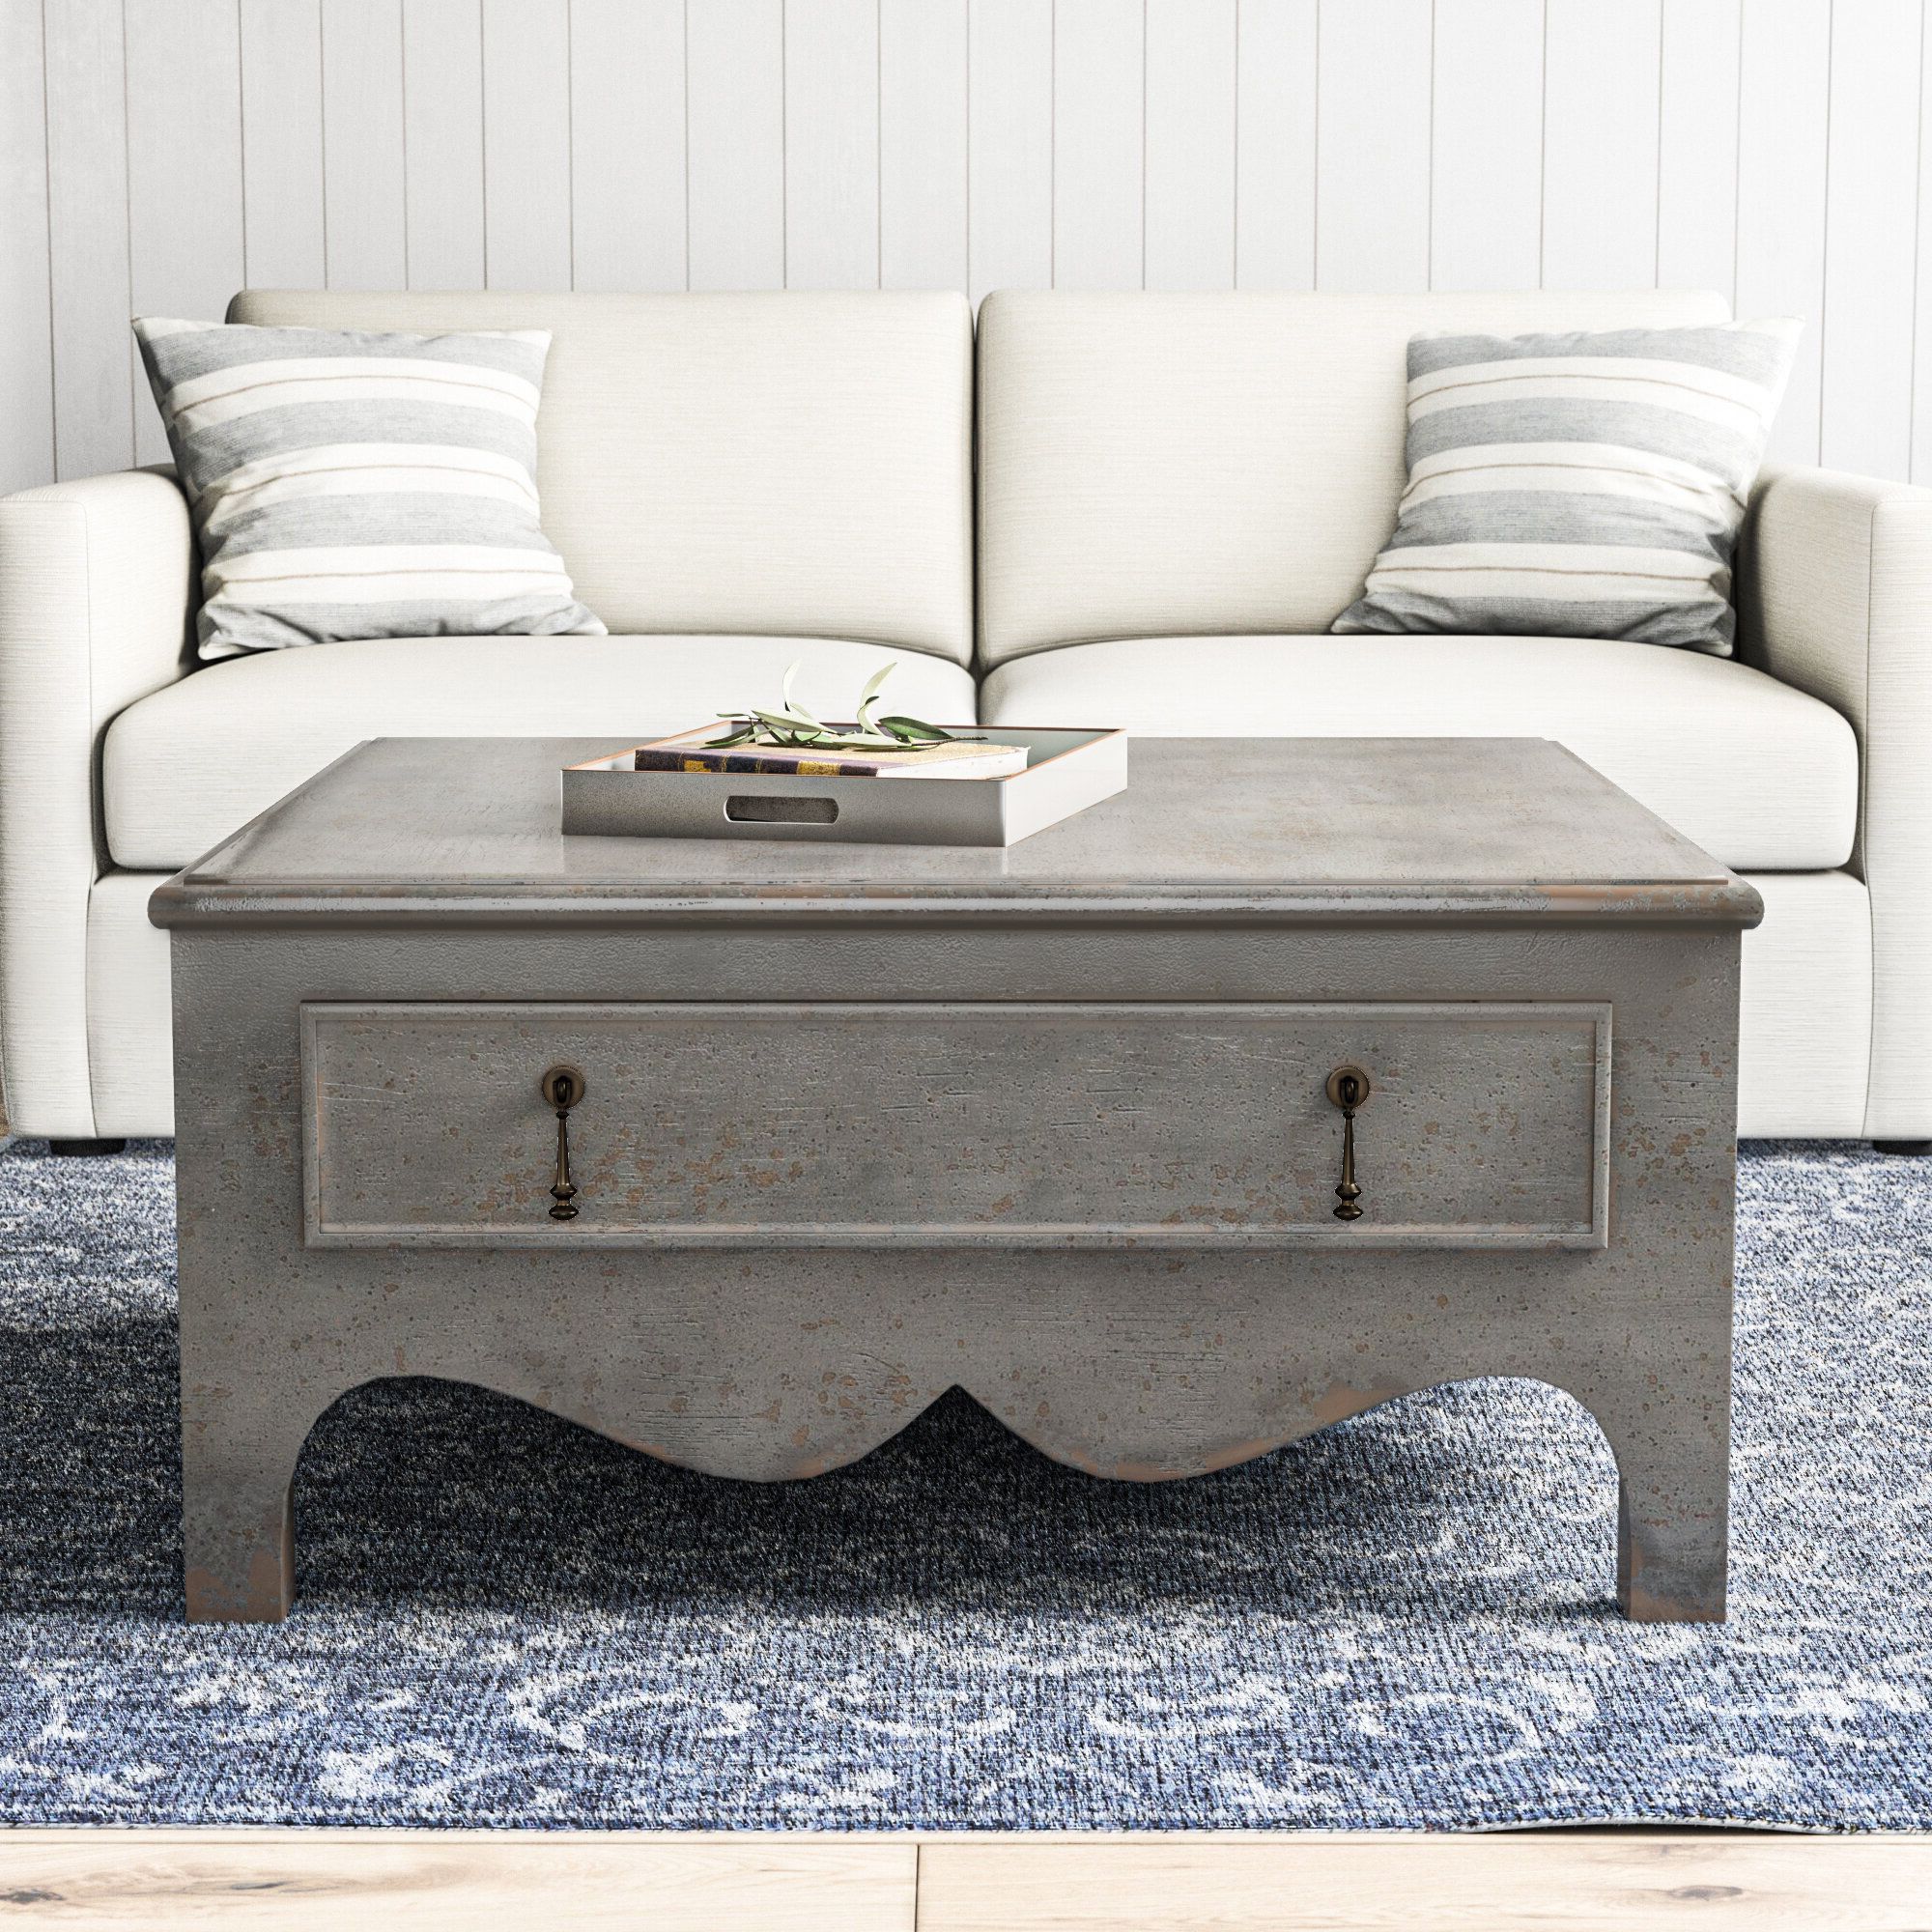 Grey Coffee Table With Storage – Winners Only Hartford Ah300c 50 Coffee Intended For Favorite Gray Driftwood Storage Coffee Tables (View 1 of 10)